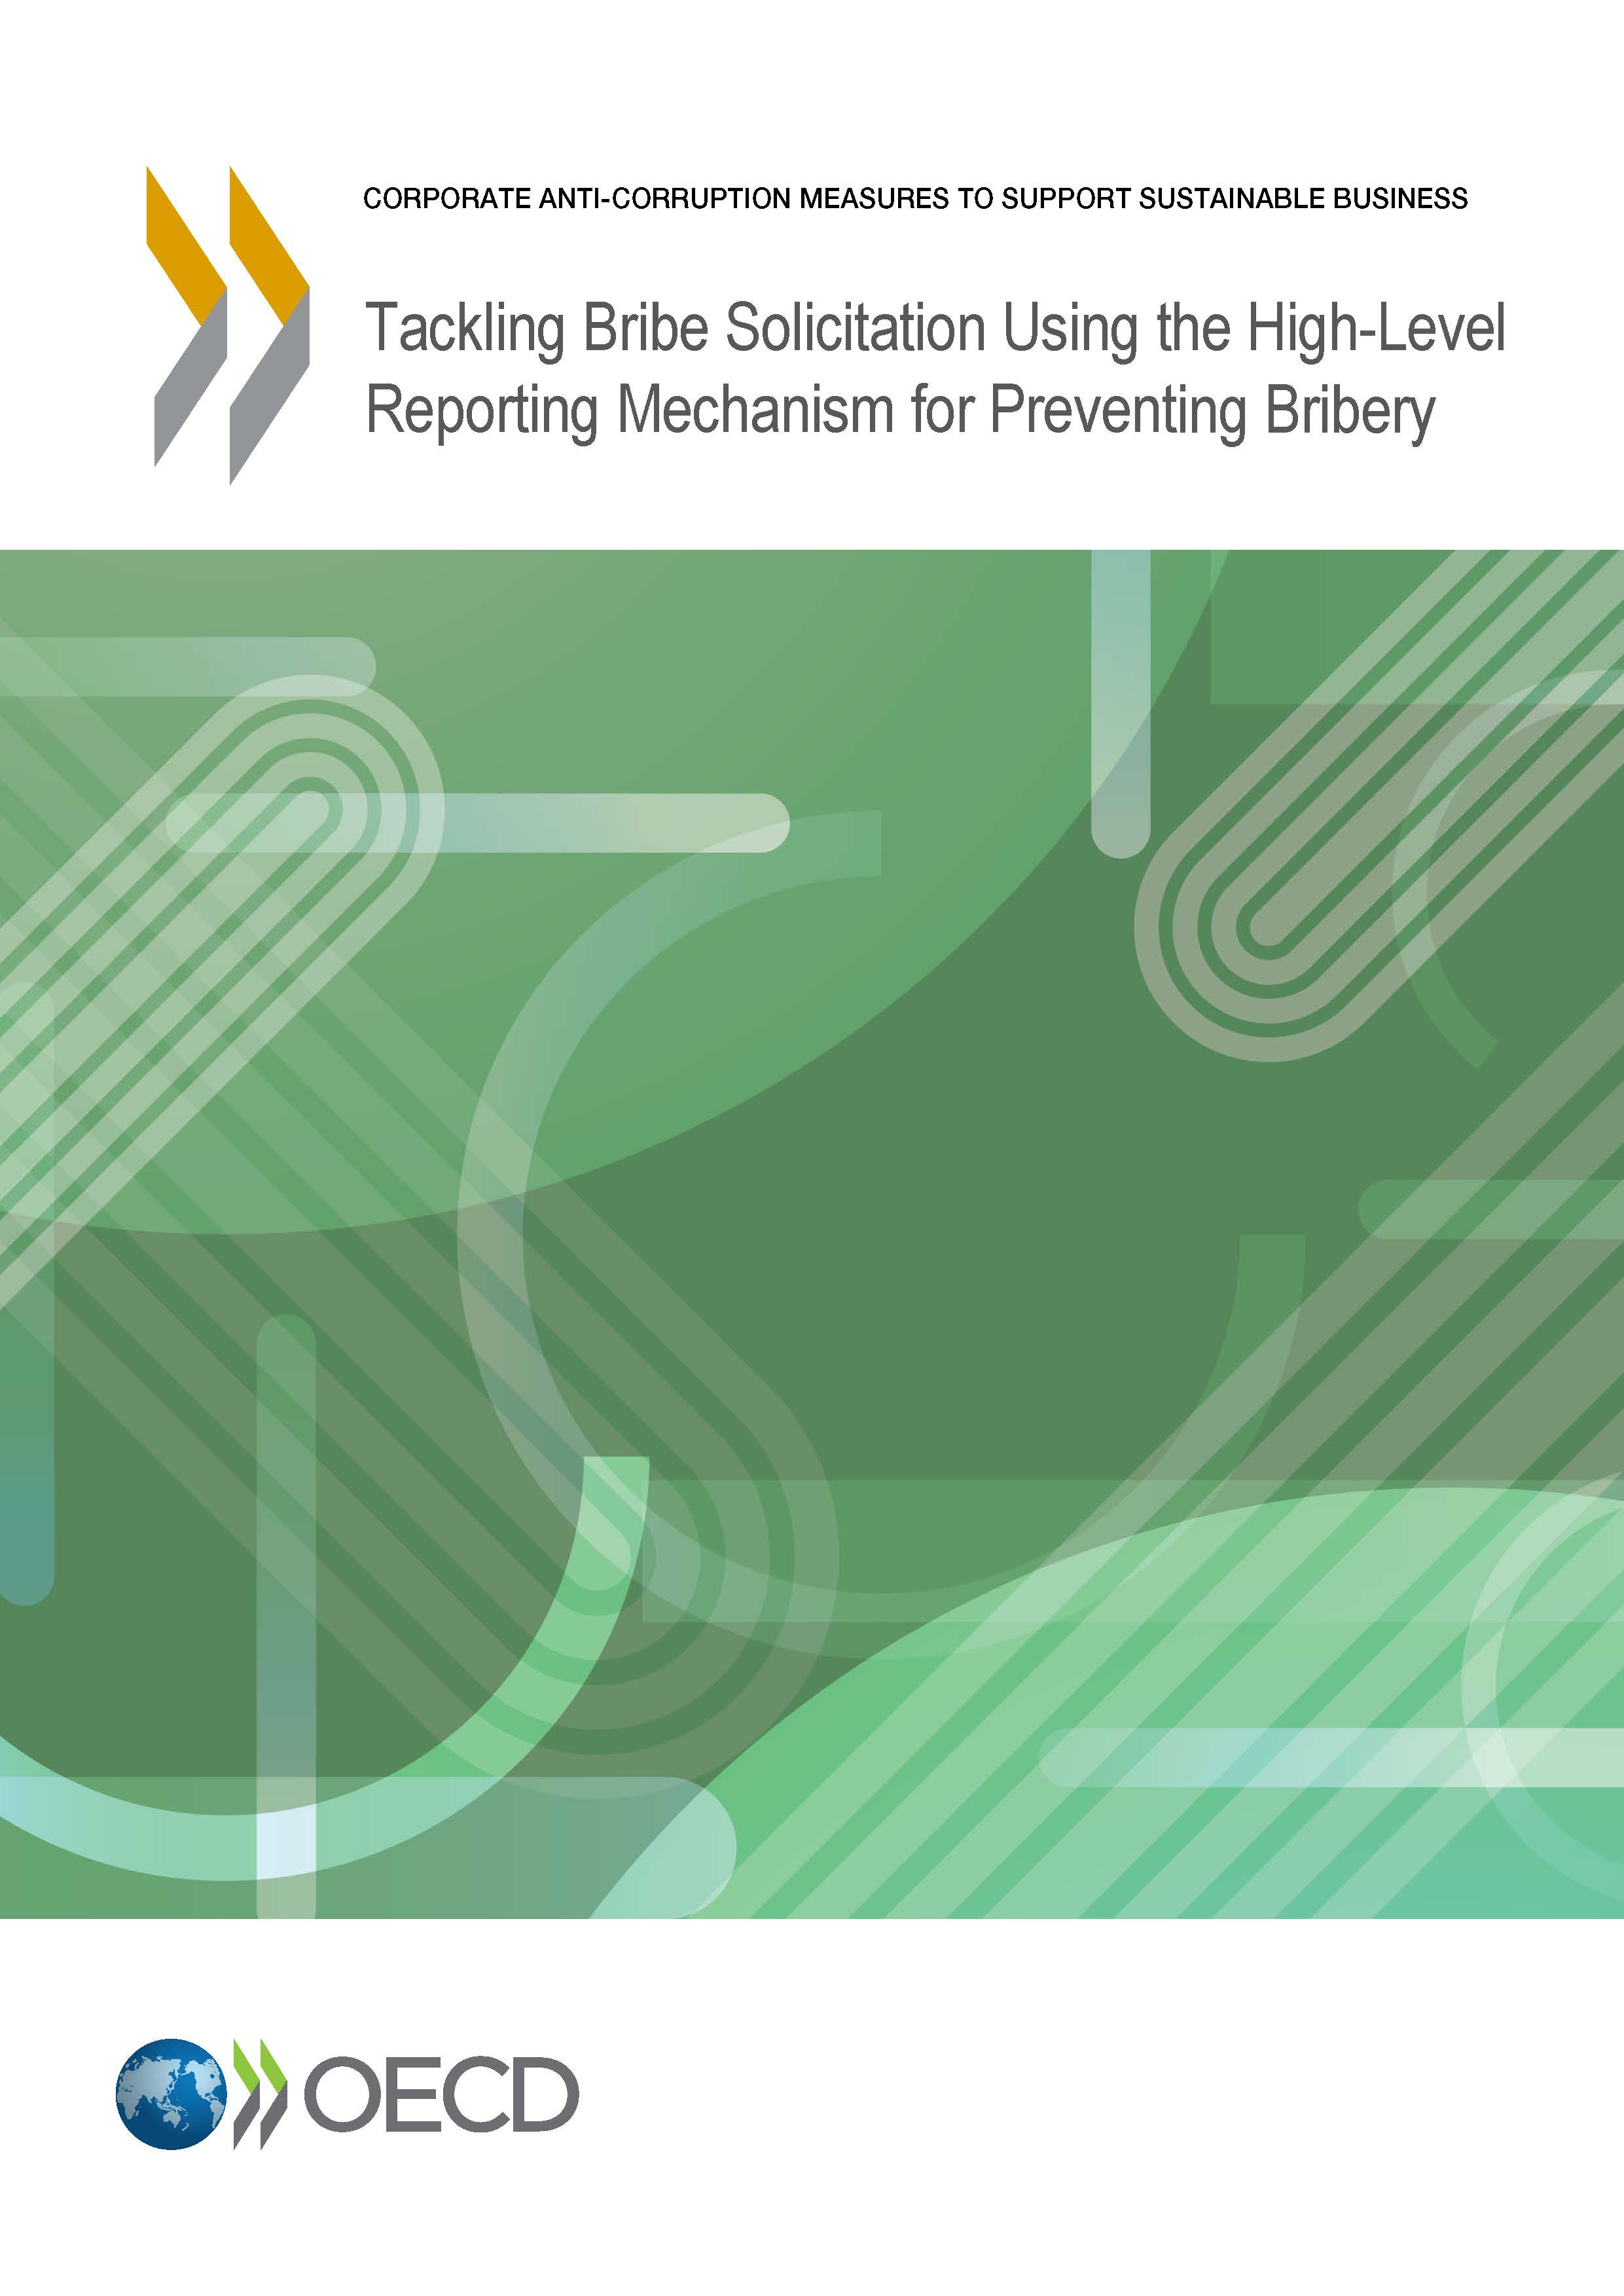 OECD study on the High Level Reporting Mechanism page 1